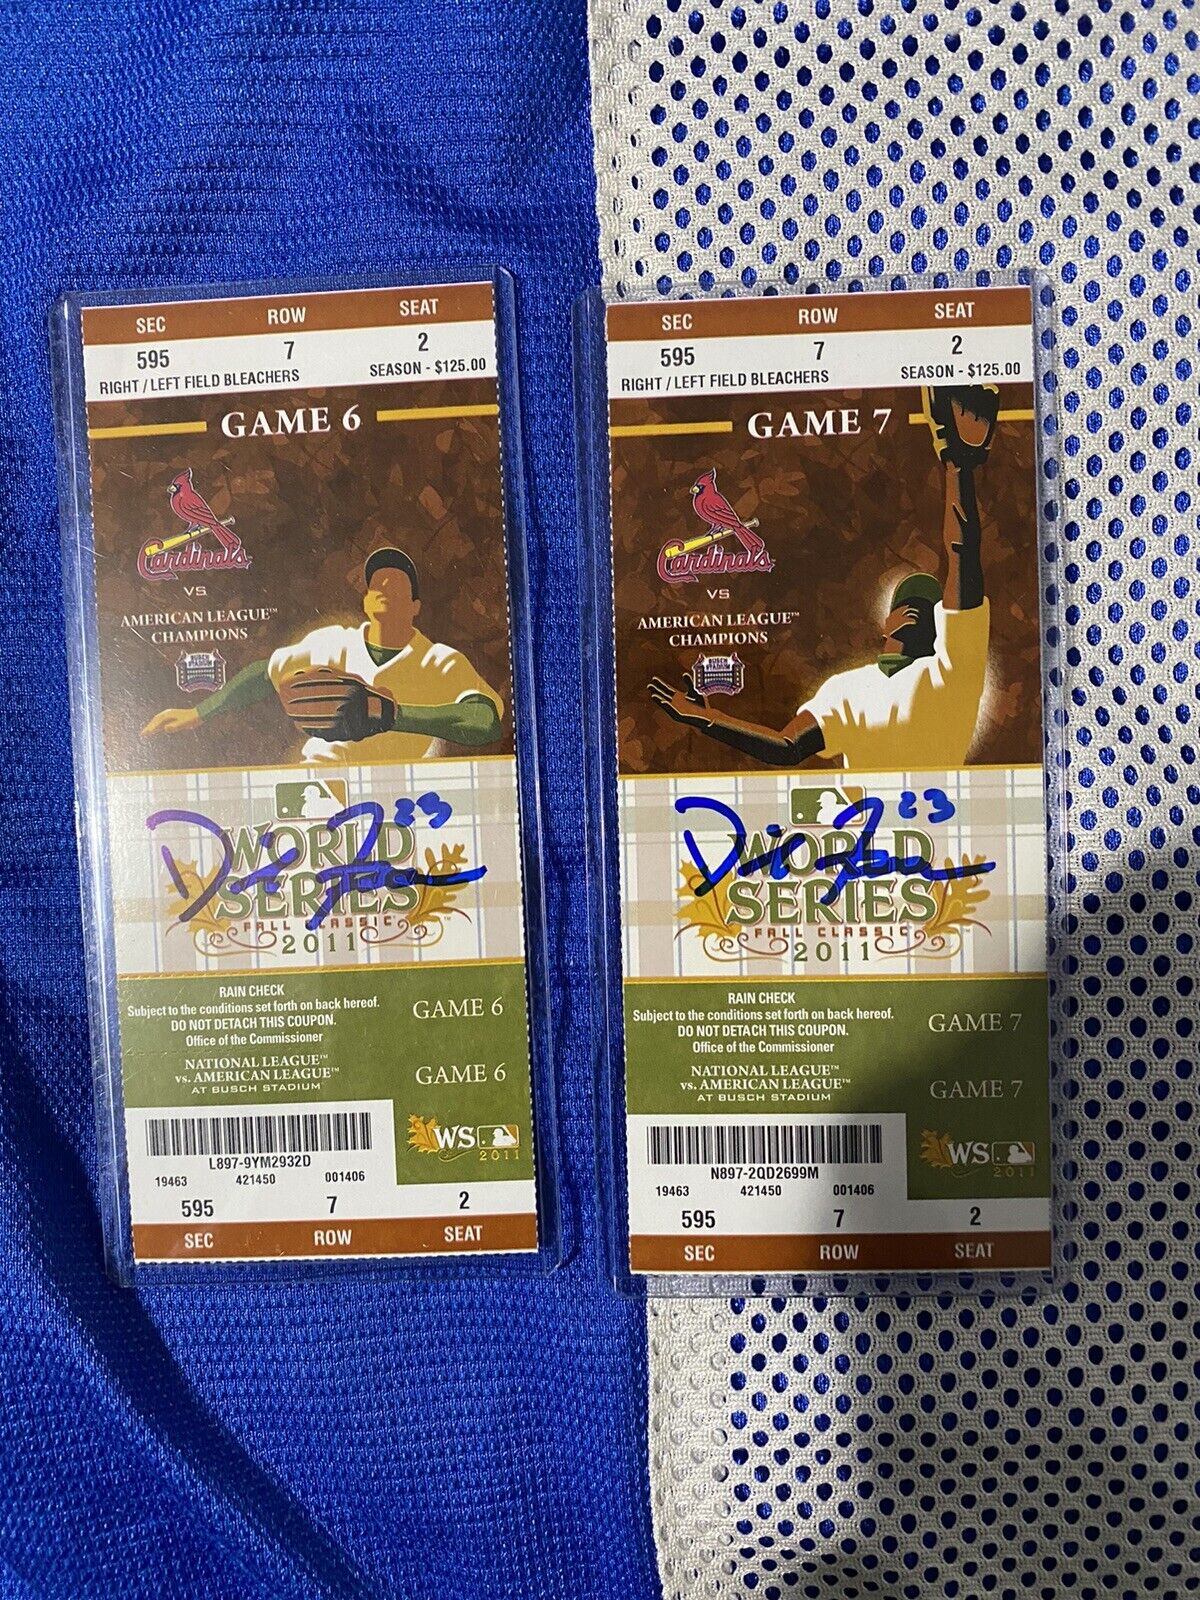 2011 world series game 6 and 7 tickets signed by david freese Cardinals Champs